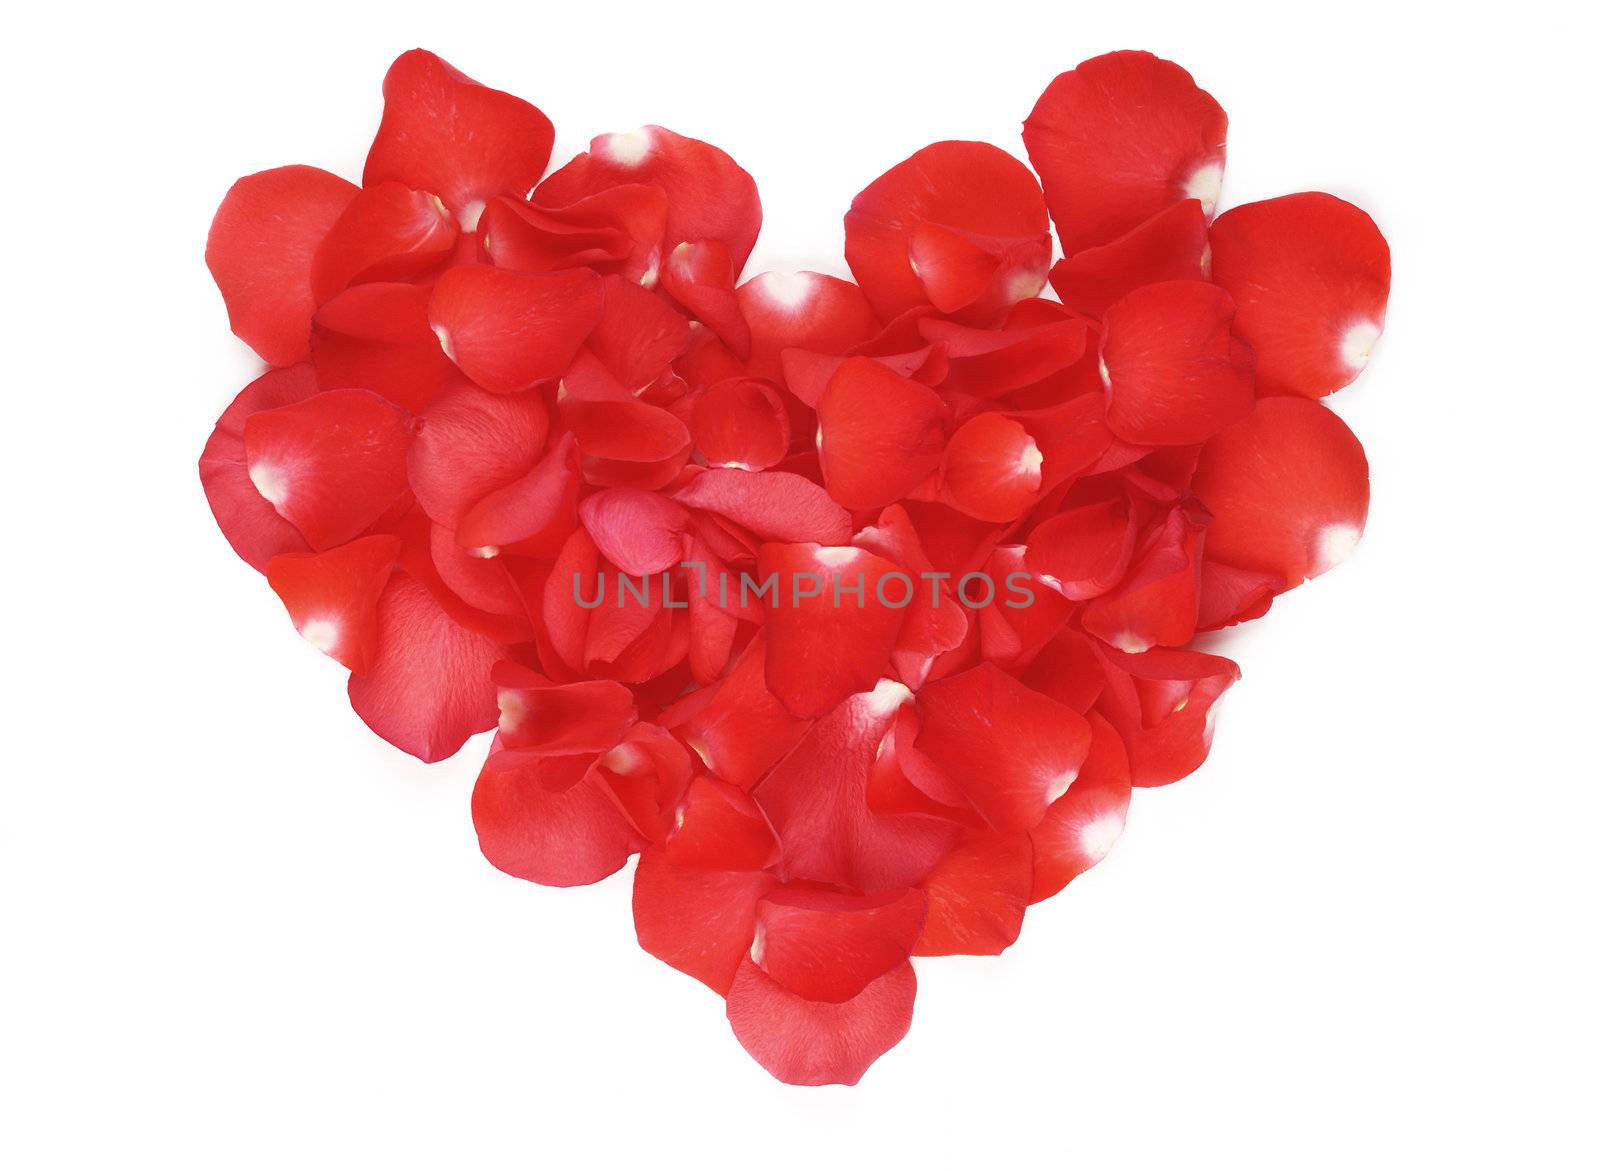 Heart made with red rose petals 